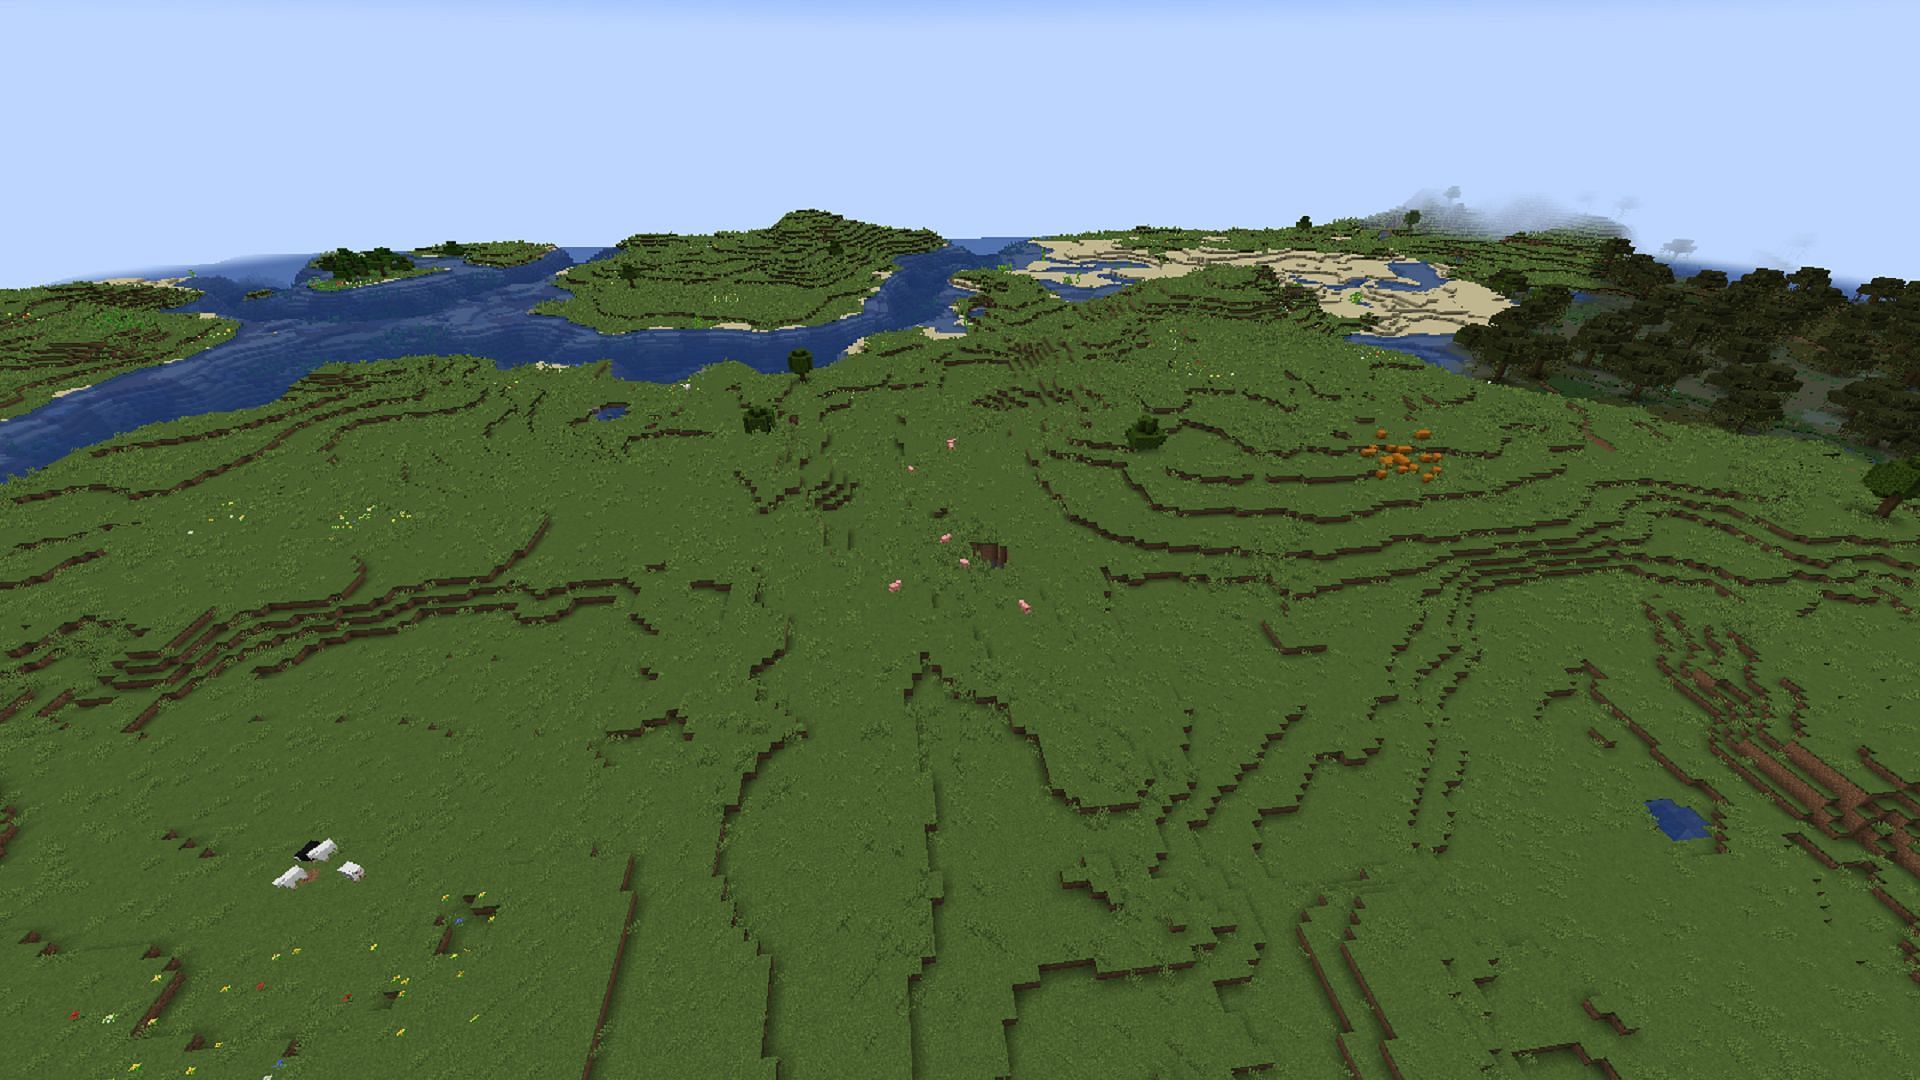 This Minecraft seed offers some biome diversity along with a nice plains biome for building (Image via Mojang)